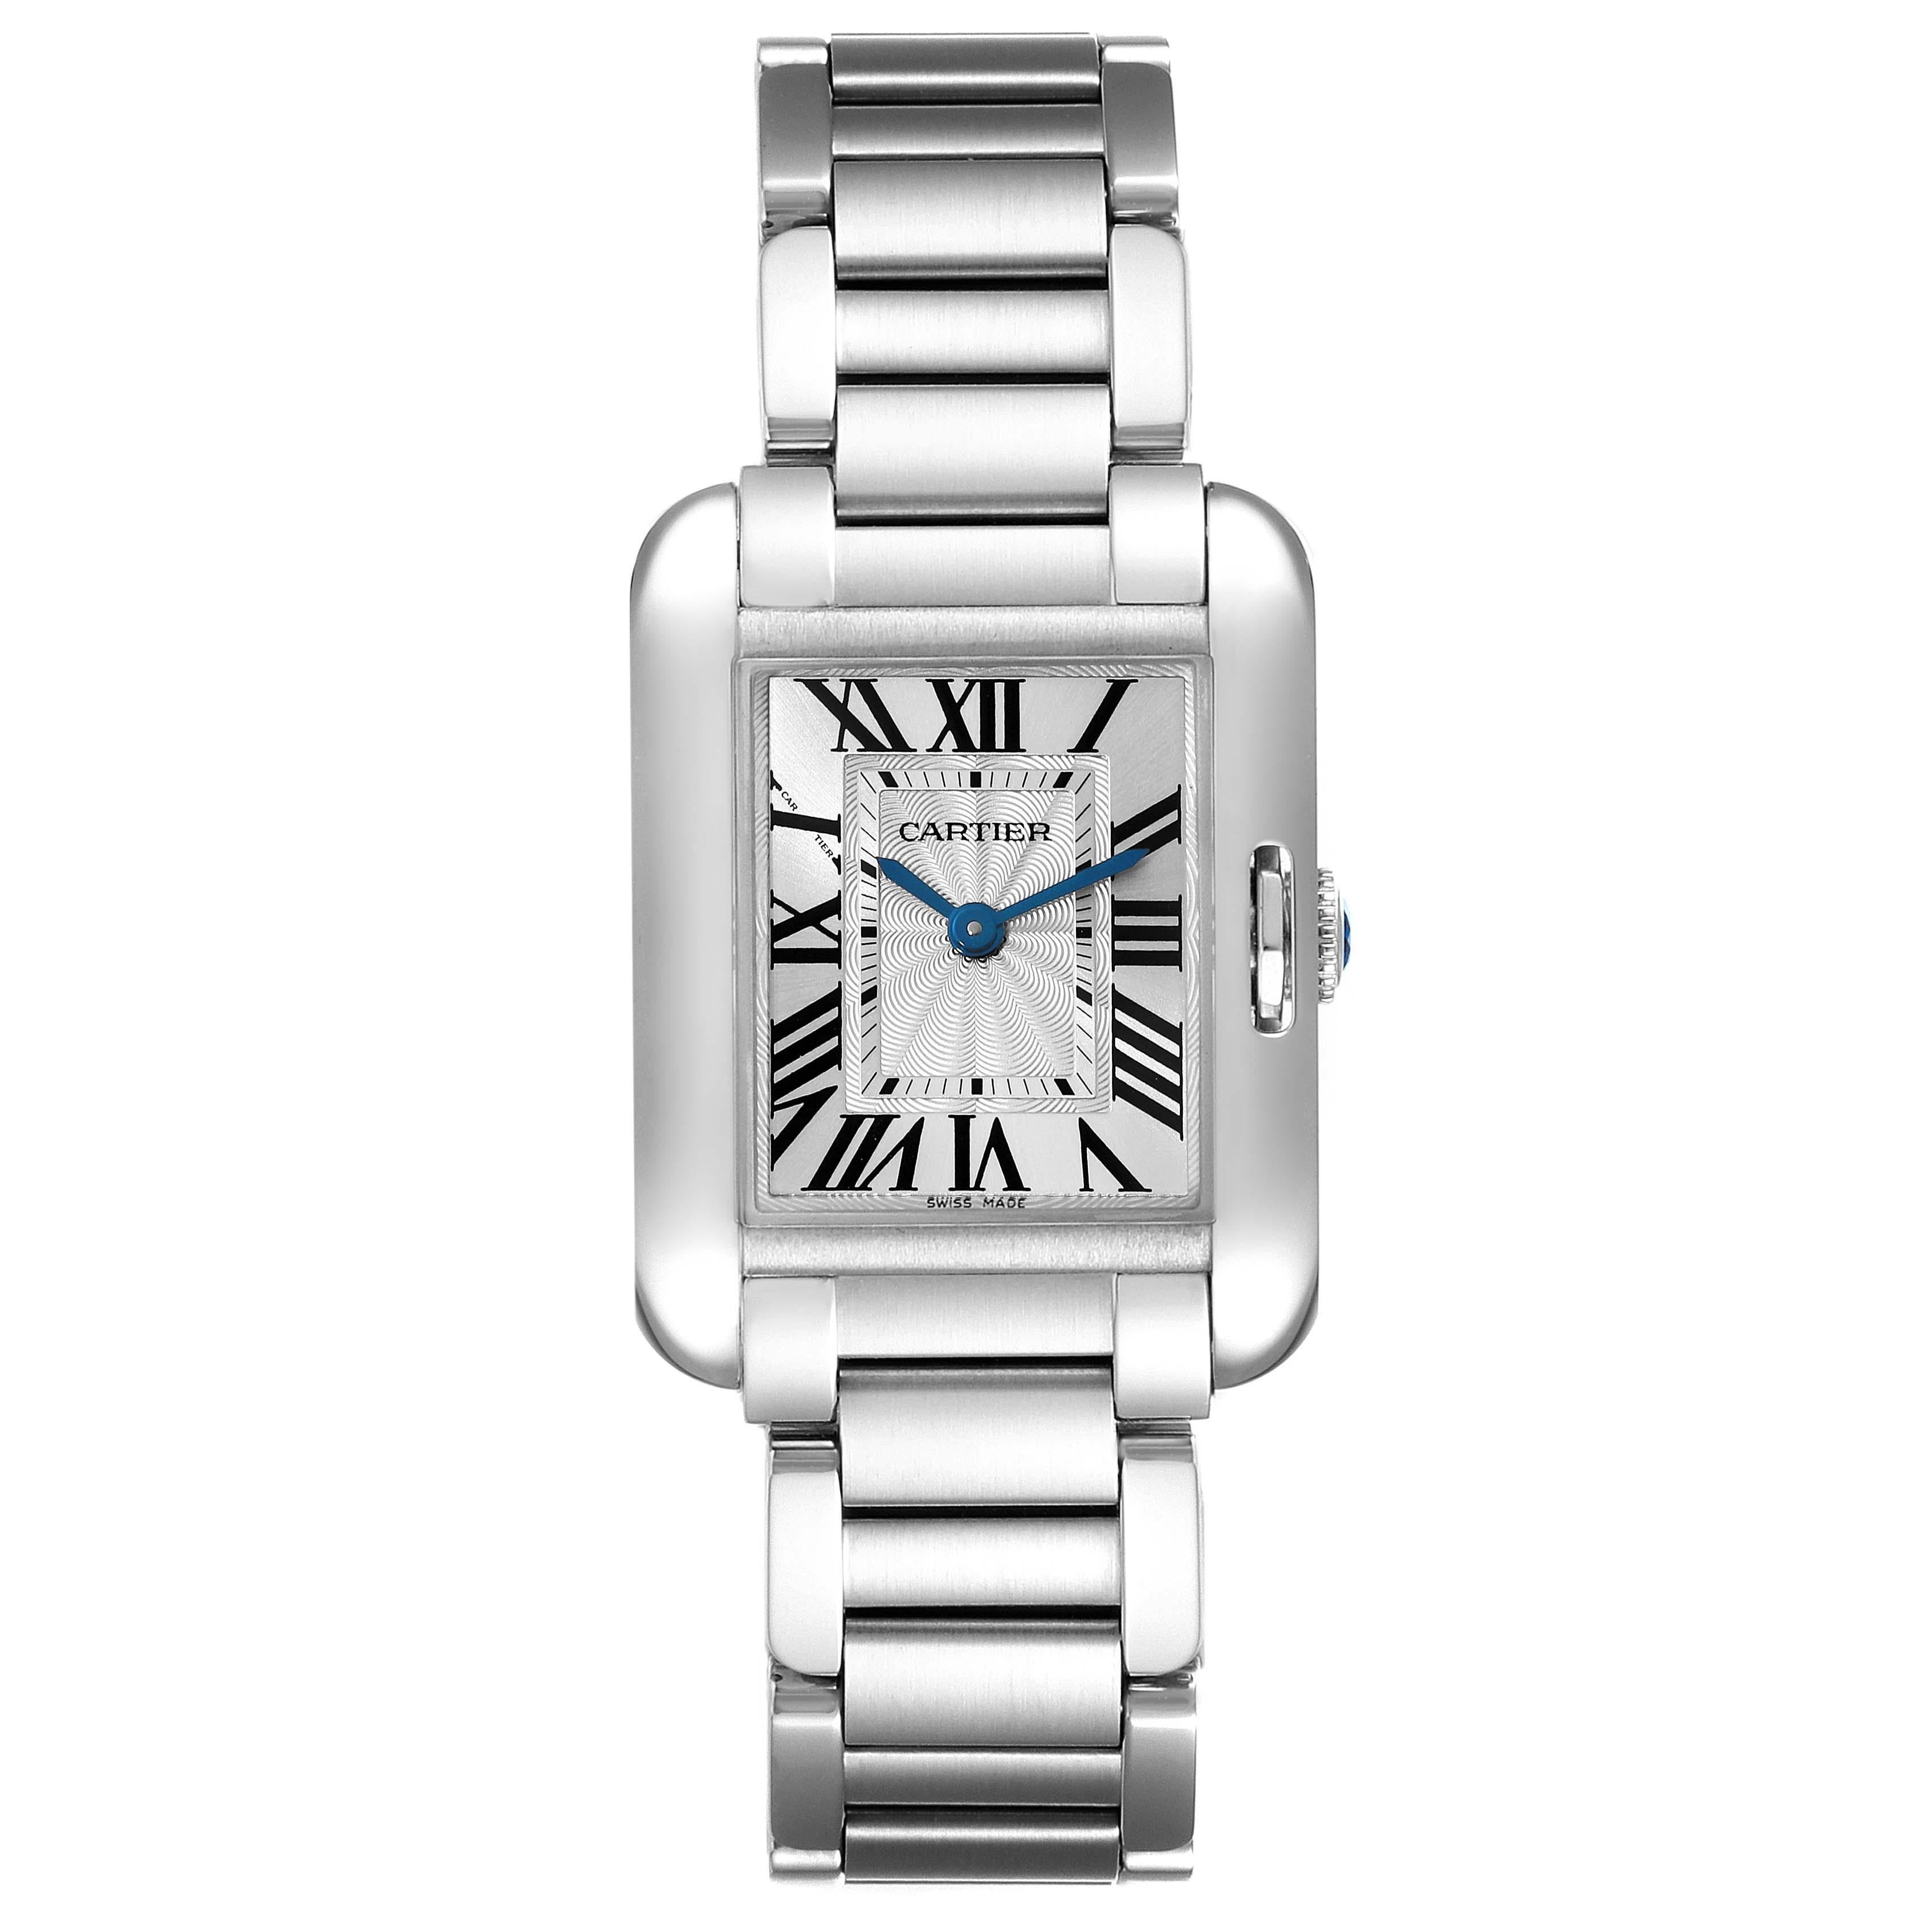 Cartier Tank Anglaise Small Silver Dial Steel Ladies Watch W5310022. Quartz movement. Stainless steel case 30.2 x 22.7 mm. Circular grained crown set with the blue spinel cabochon. . Scratch resistant sapphire crystal. Flinque and silvered dial with